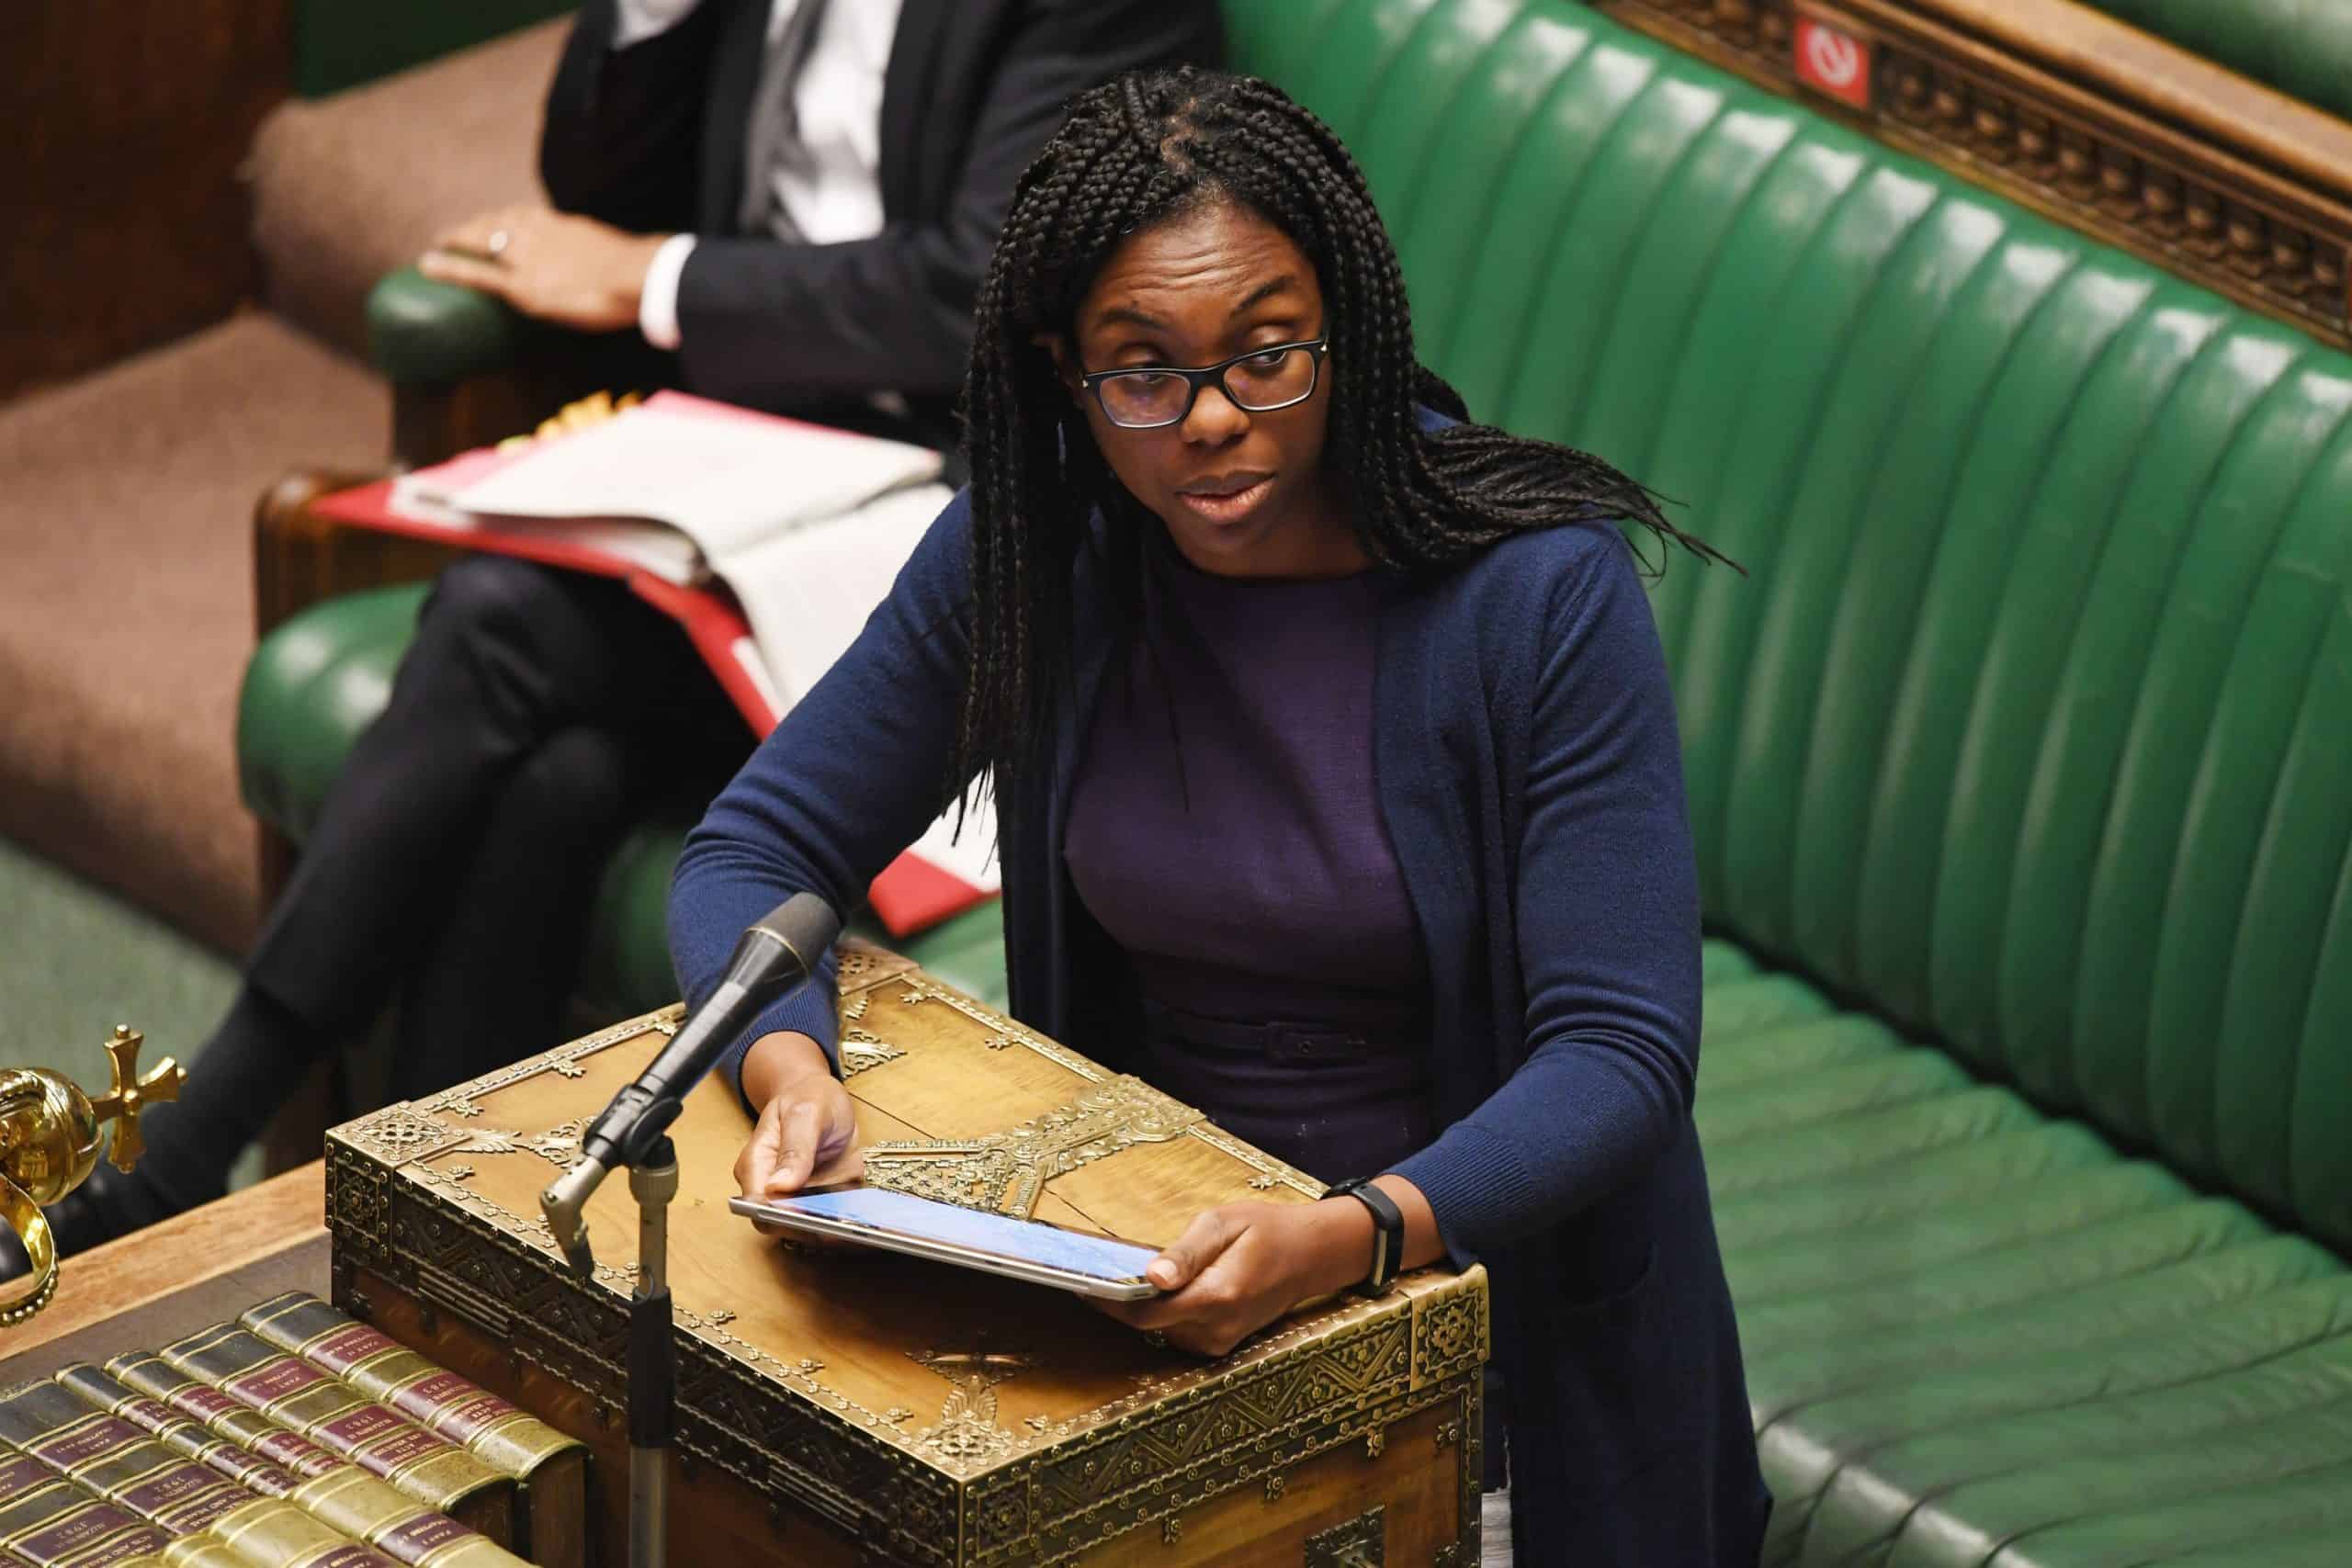 ‘I don’t care about colonialism’, Kemi Badenoch says